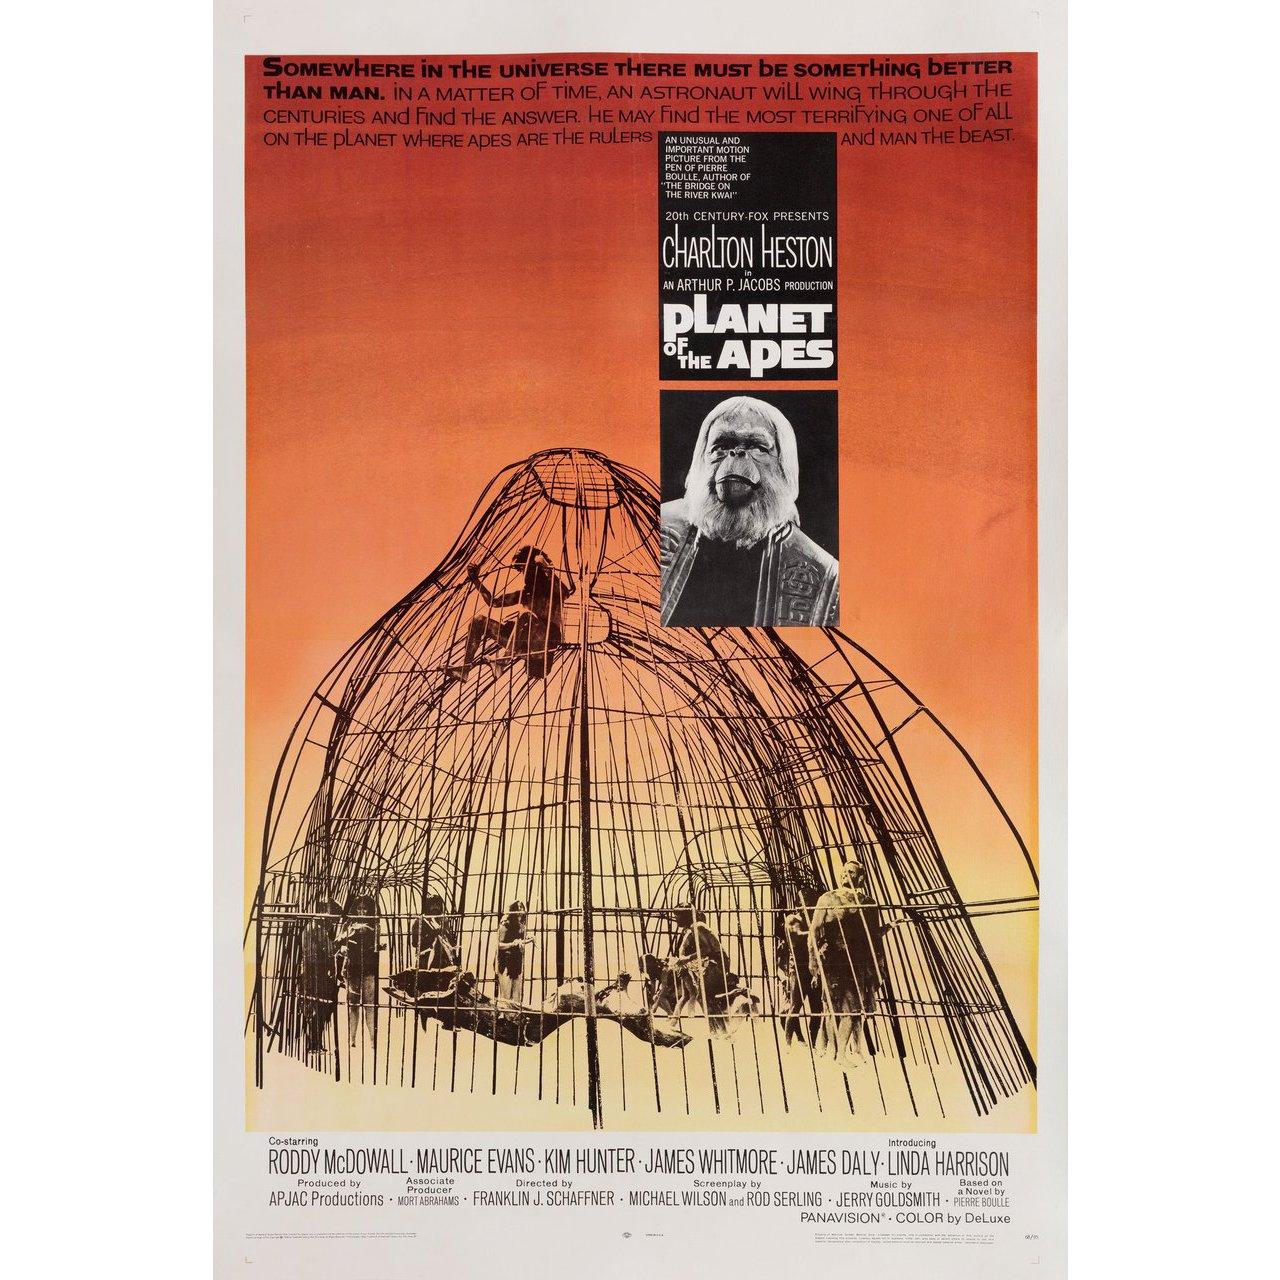 Original 1968 U.S. one sheet poster for the film Planet of the Apes directed by Franklin J. Schaffner with Charlton Heston / Roddy McDowall / Kim Hunter / Maurice Evans. Fine condition, linen-backed. This poster has been professionally linen-backed.